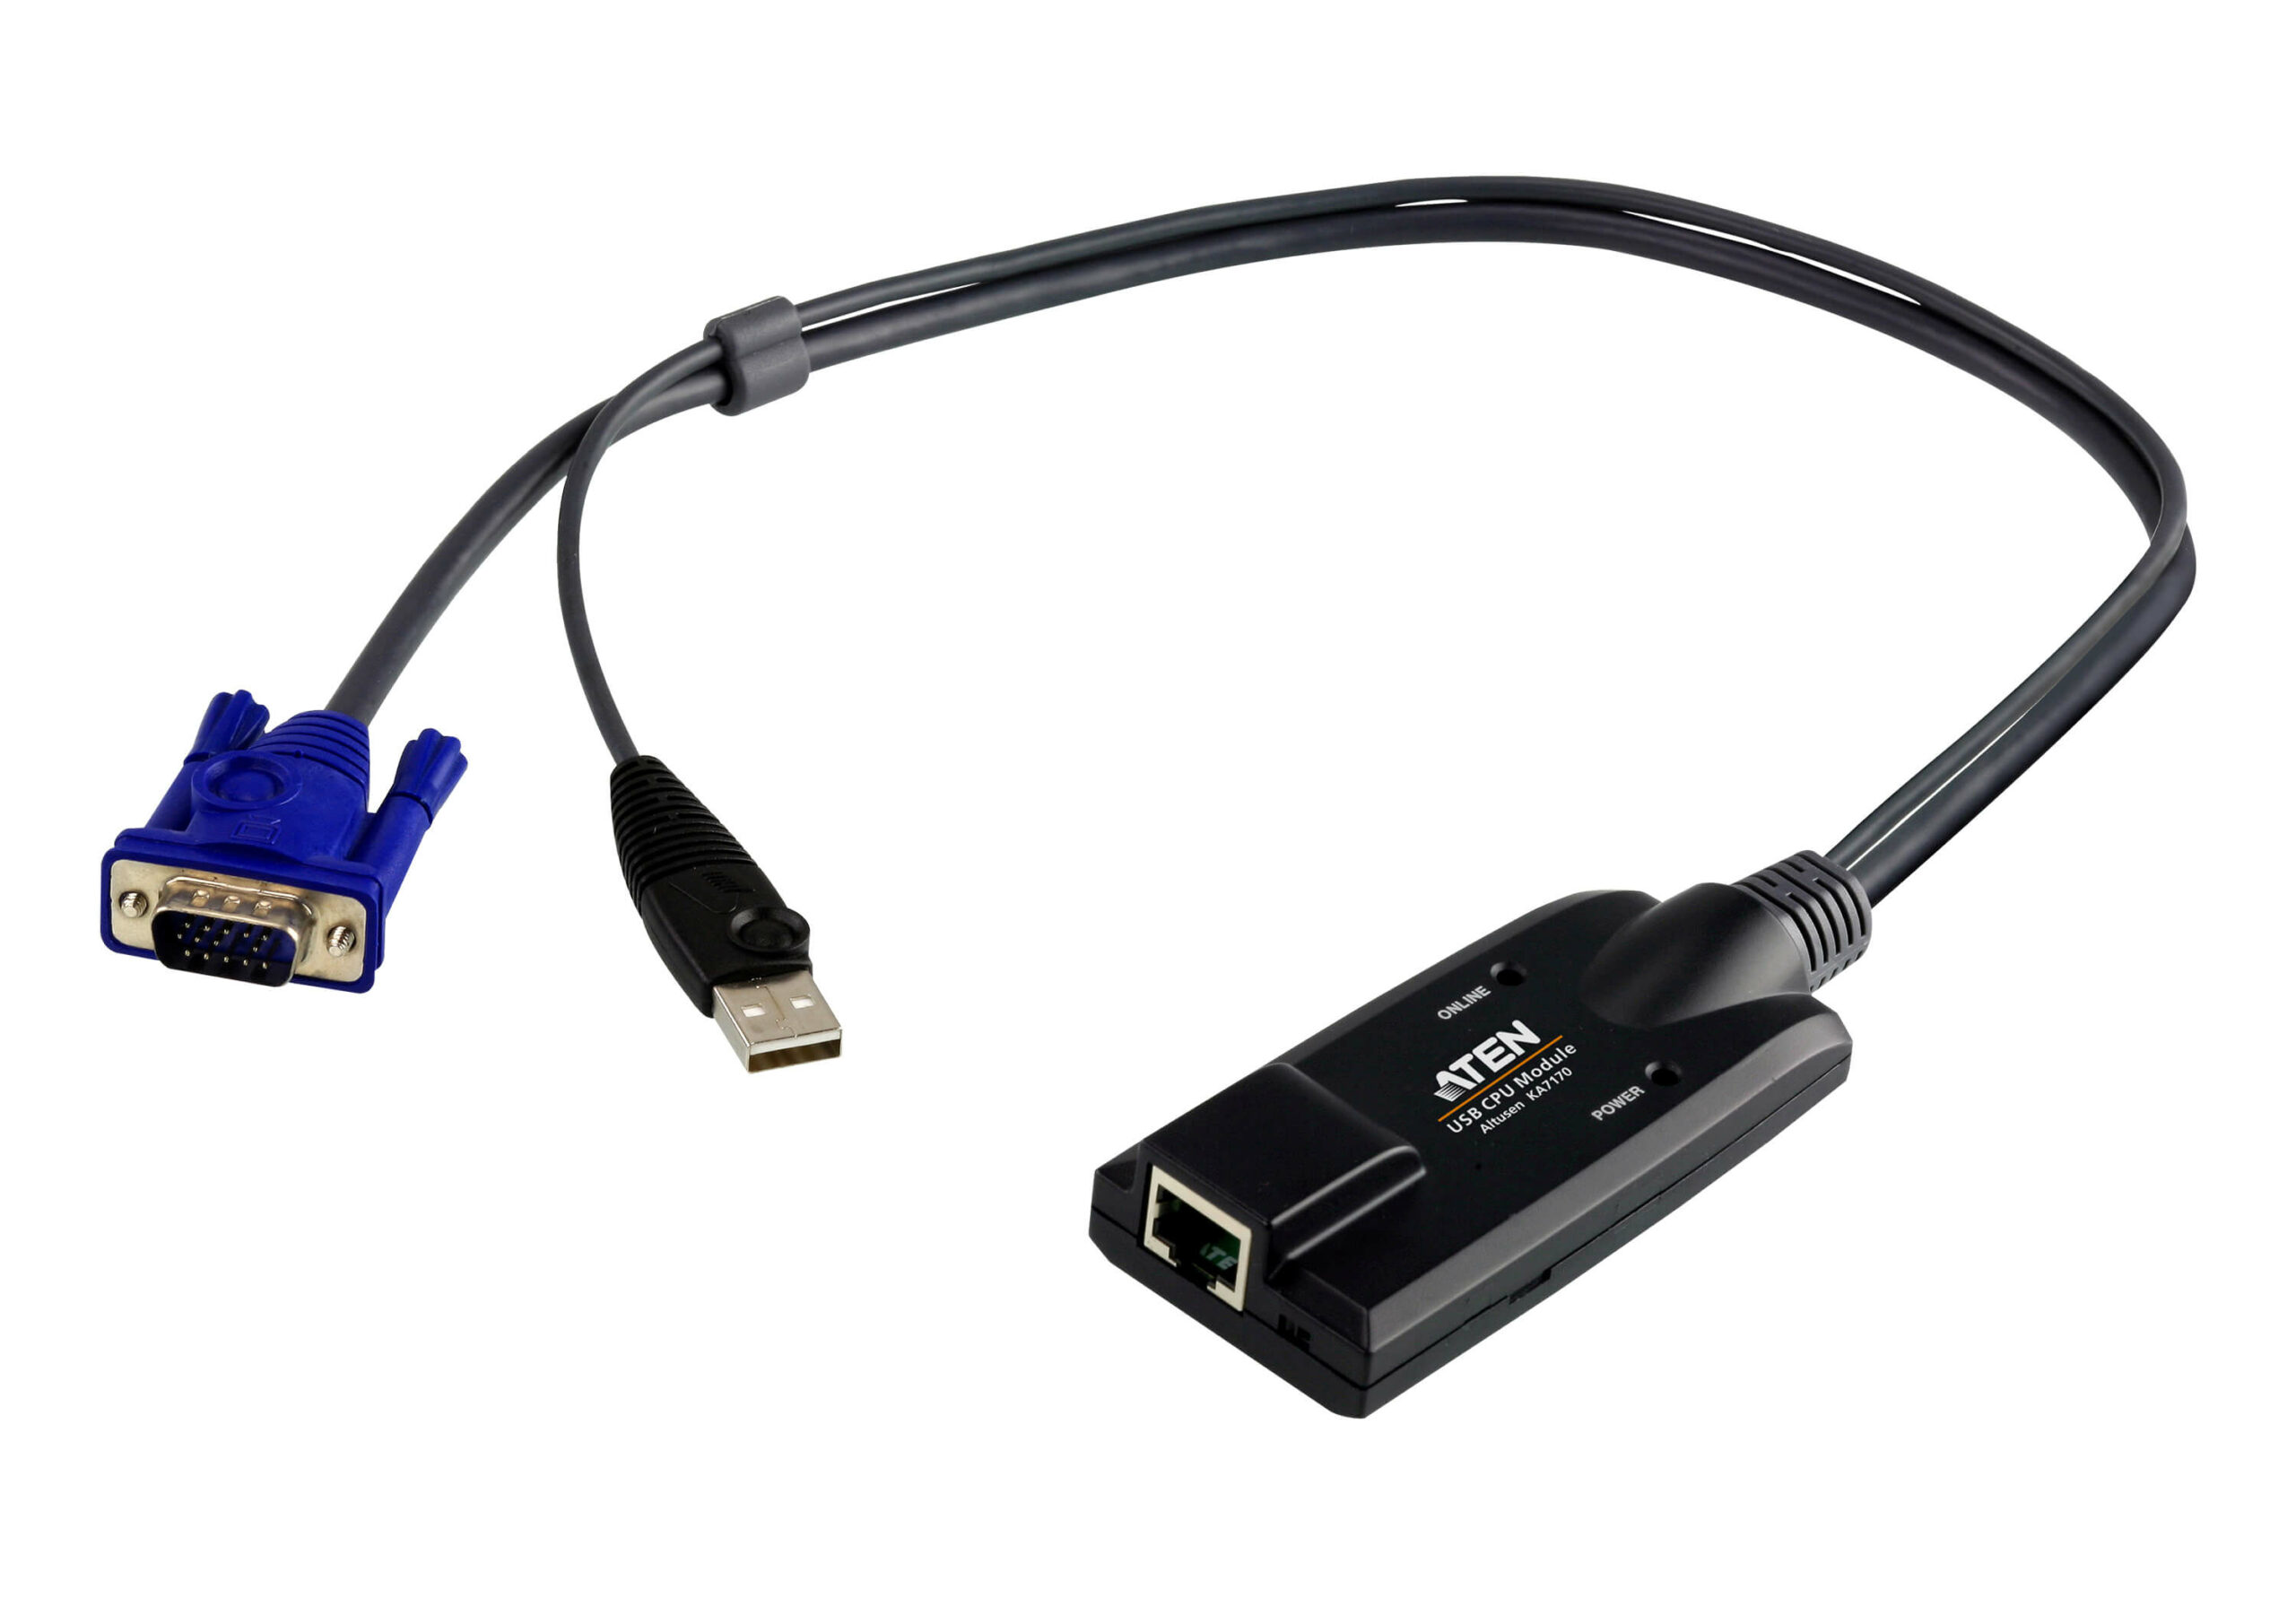 Aten KVM Cable Adapter with RJ45 to VGA  USB for KH, KL, KM and KN series